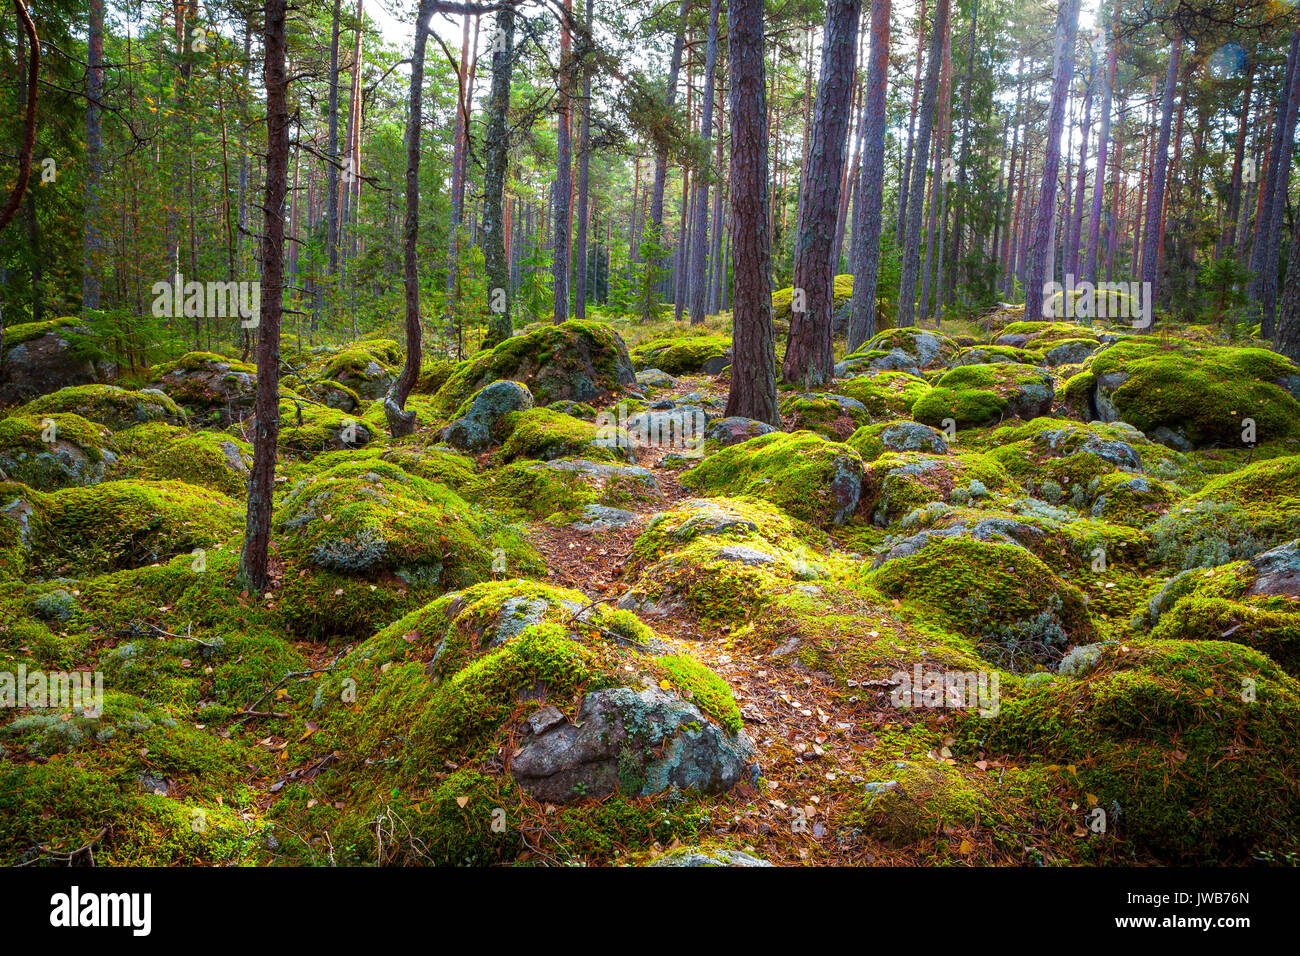 Pine forest and big boulders in beatiful day light Stock Photo